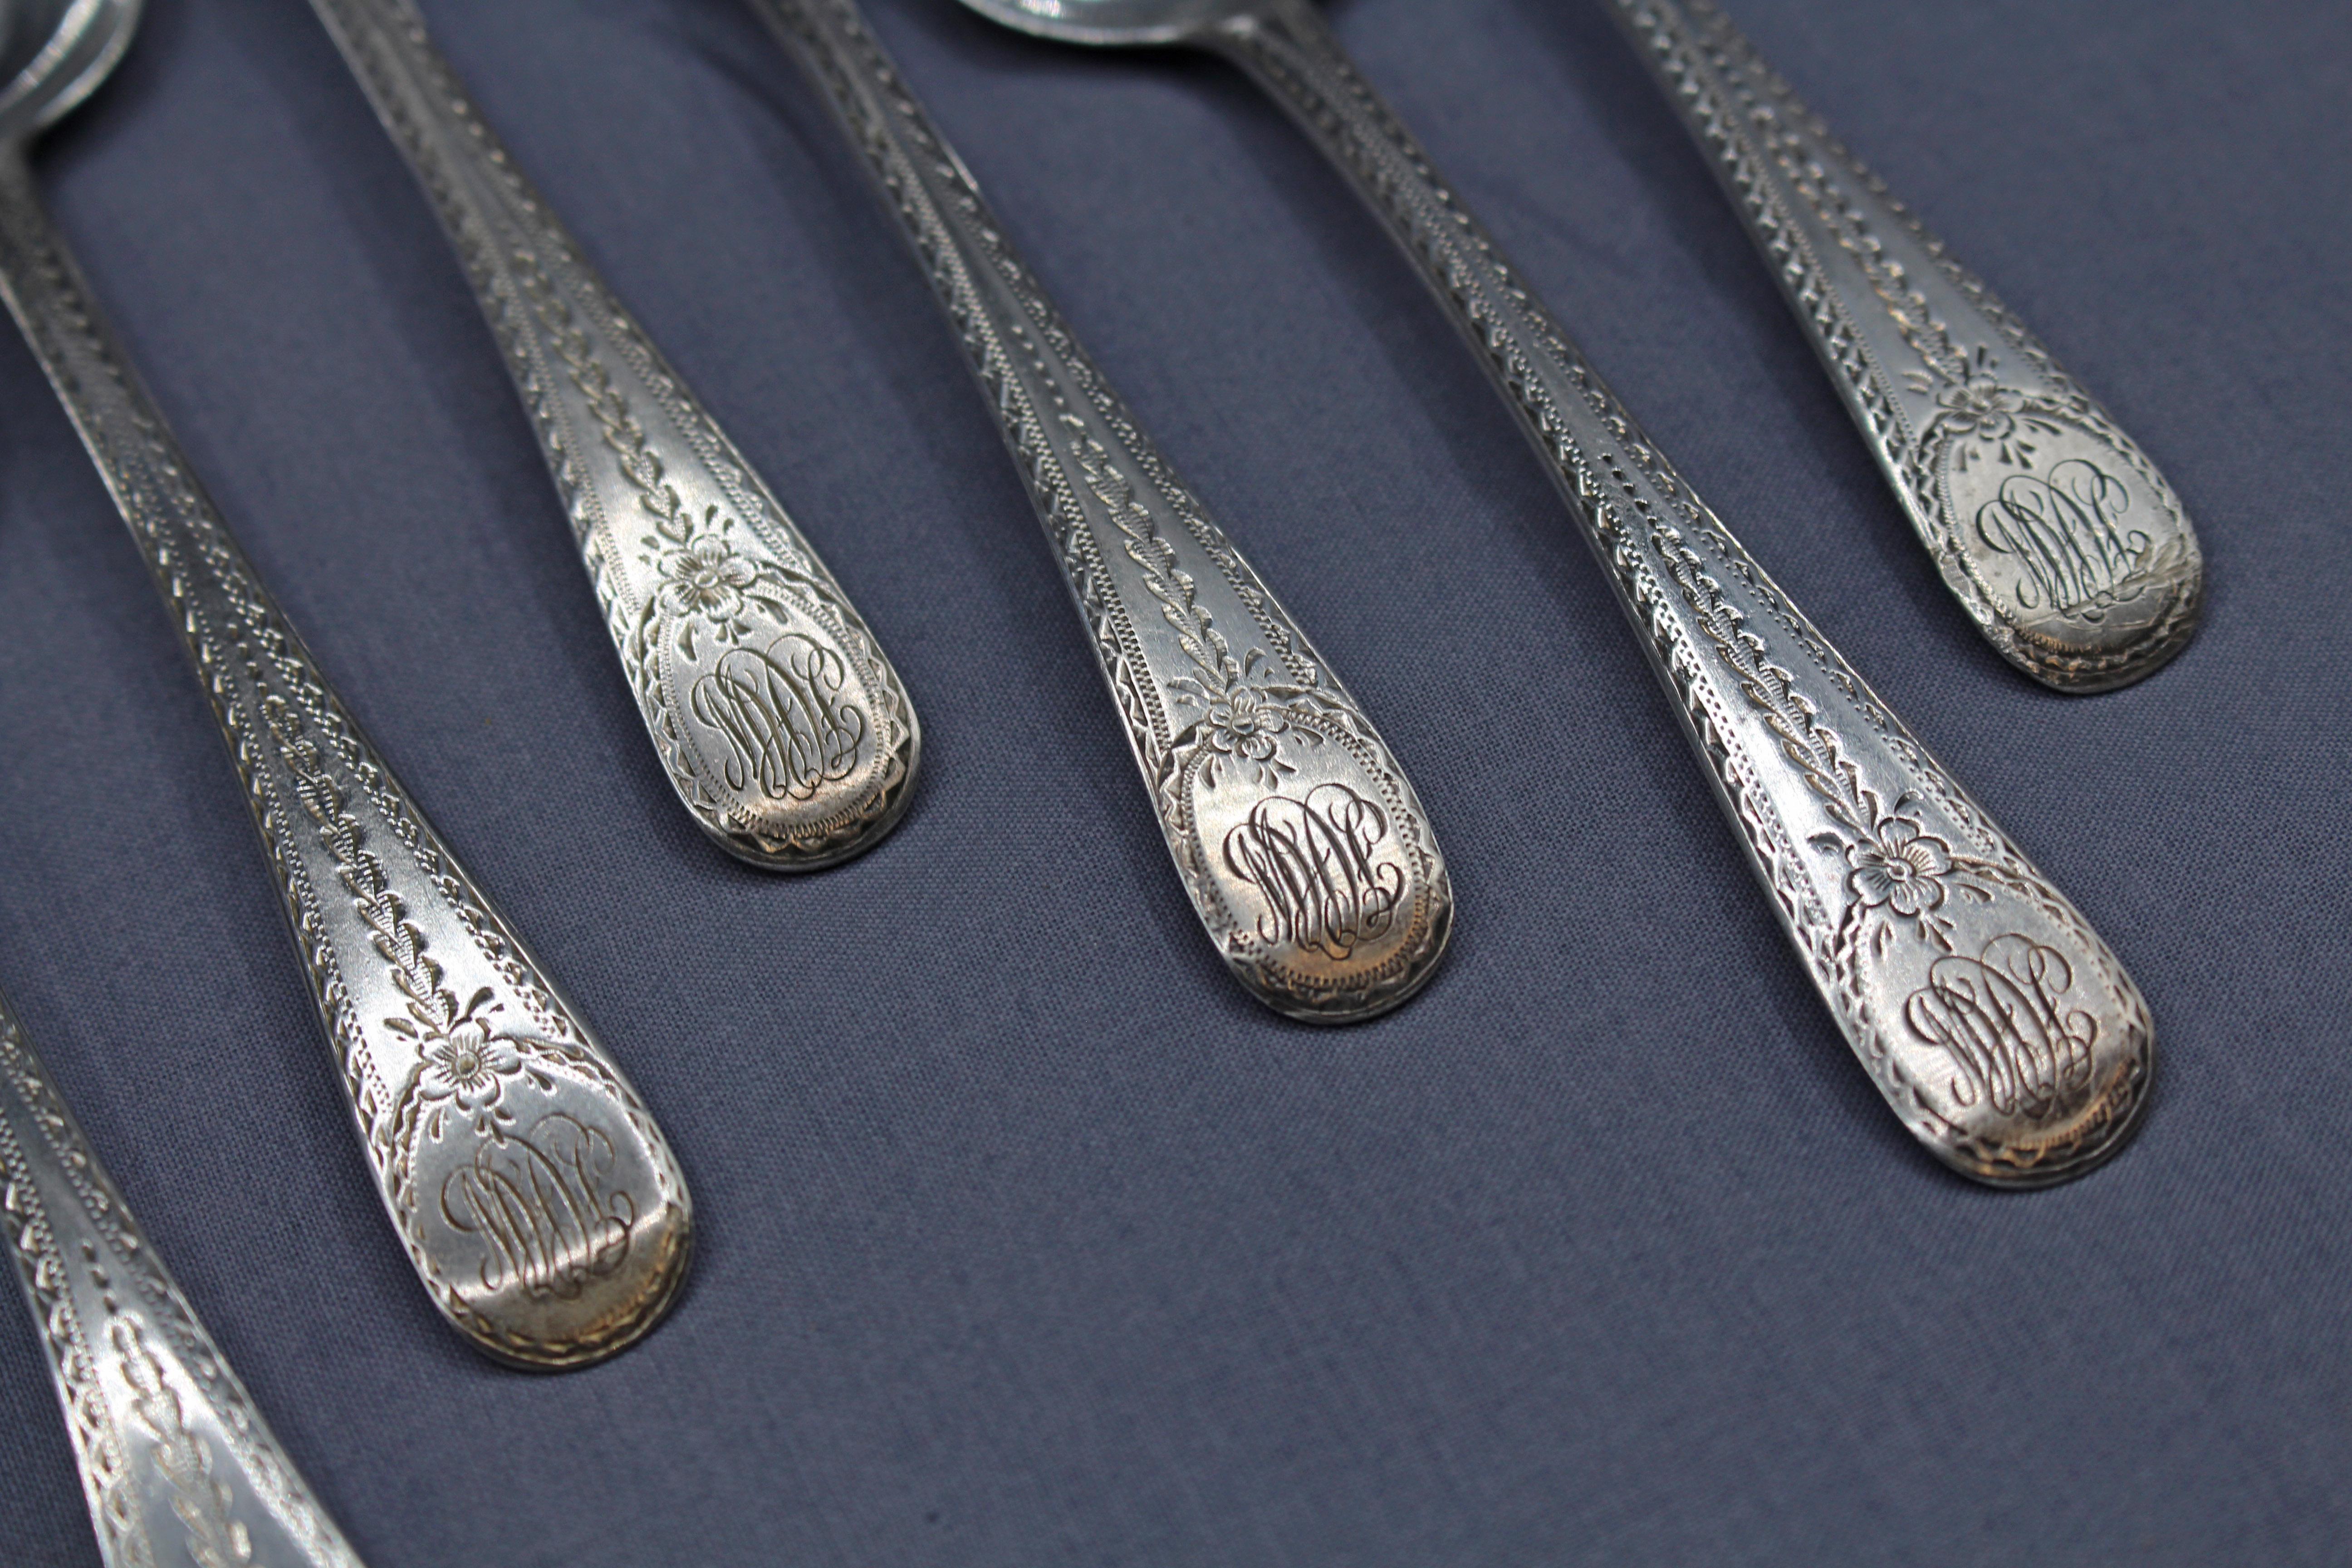 London 1818 assembled set of 10 Old English engraved pattern dessert spoons, George III sterling silver with feather edge. Assembled as 6 by Robert Peppin and 4 by William Chawner. Later conforming monogram.
Measures: 7